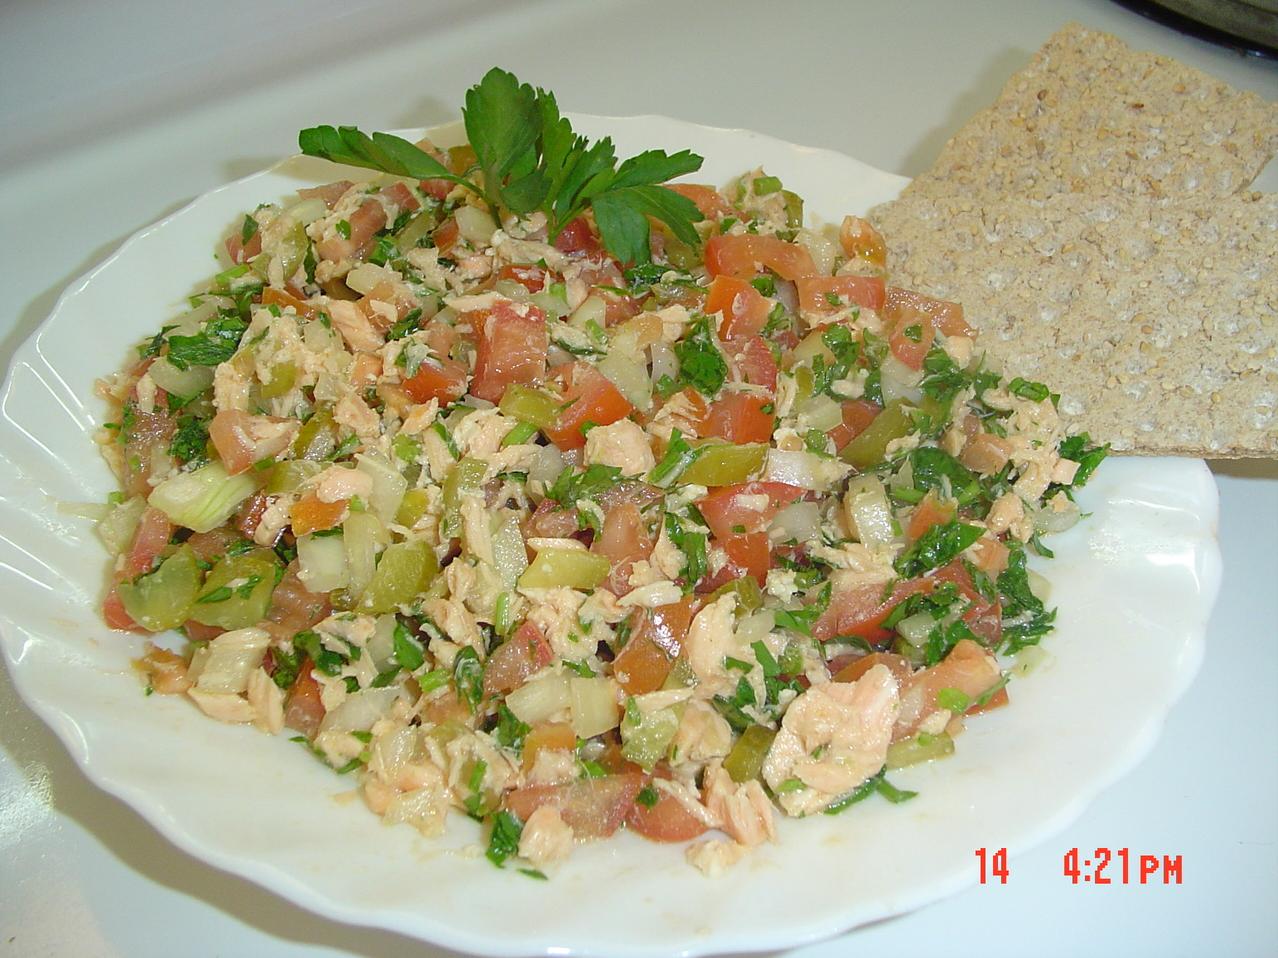 Healthy and Delicious: Low Fat Salmon Salad Recipe